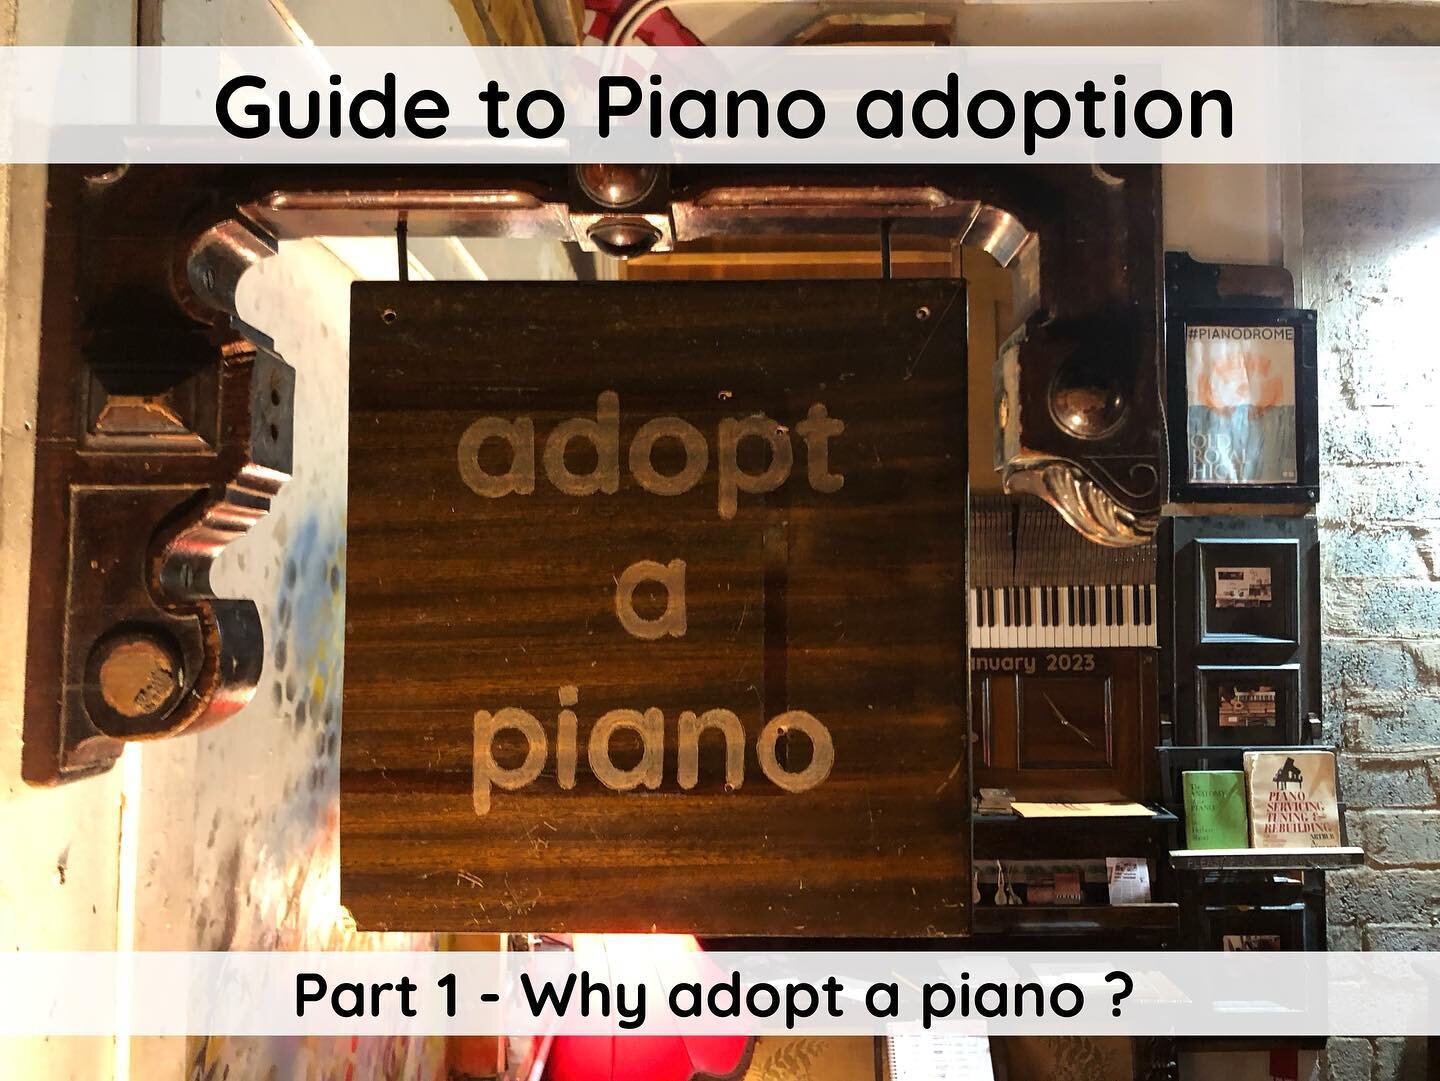 If you&rsquo;ve heard of our Adopt a Piano scheme, you might have many questions about how it all works&hellip; Here is part 1 of 3 of our Guide to Piano adoption: a breakdown of how to adopt a piano and an introduction to the work our team and volun